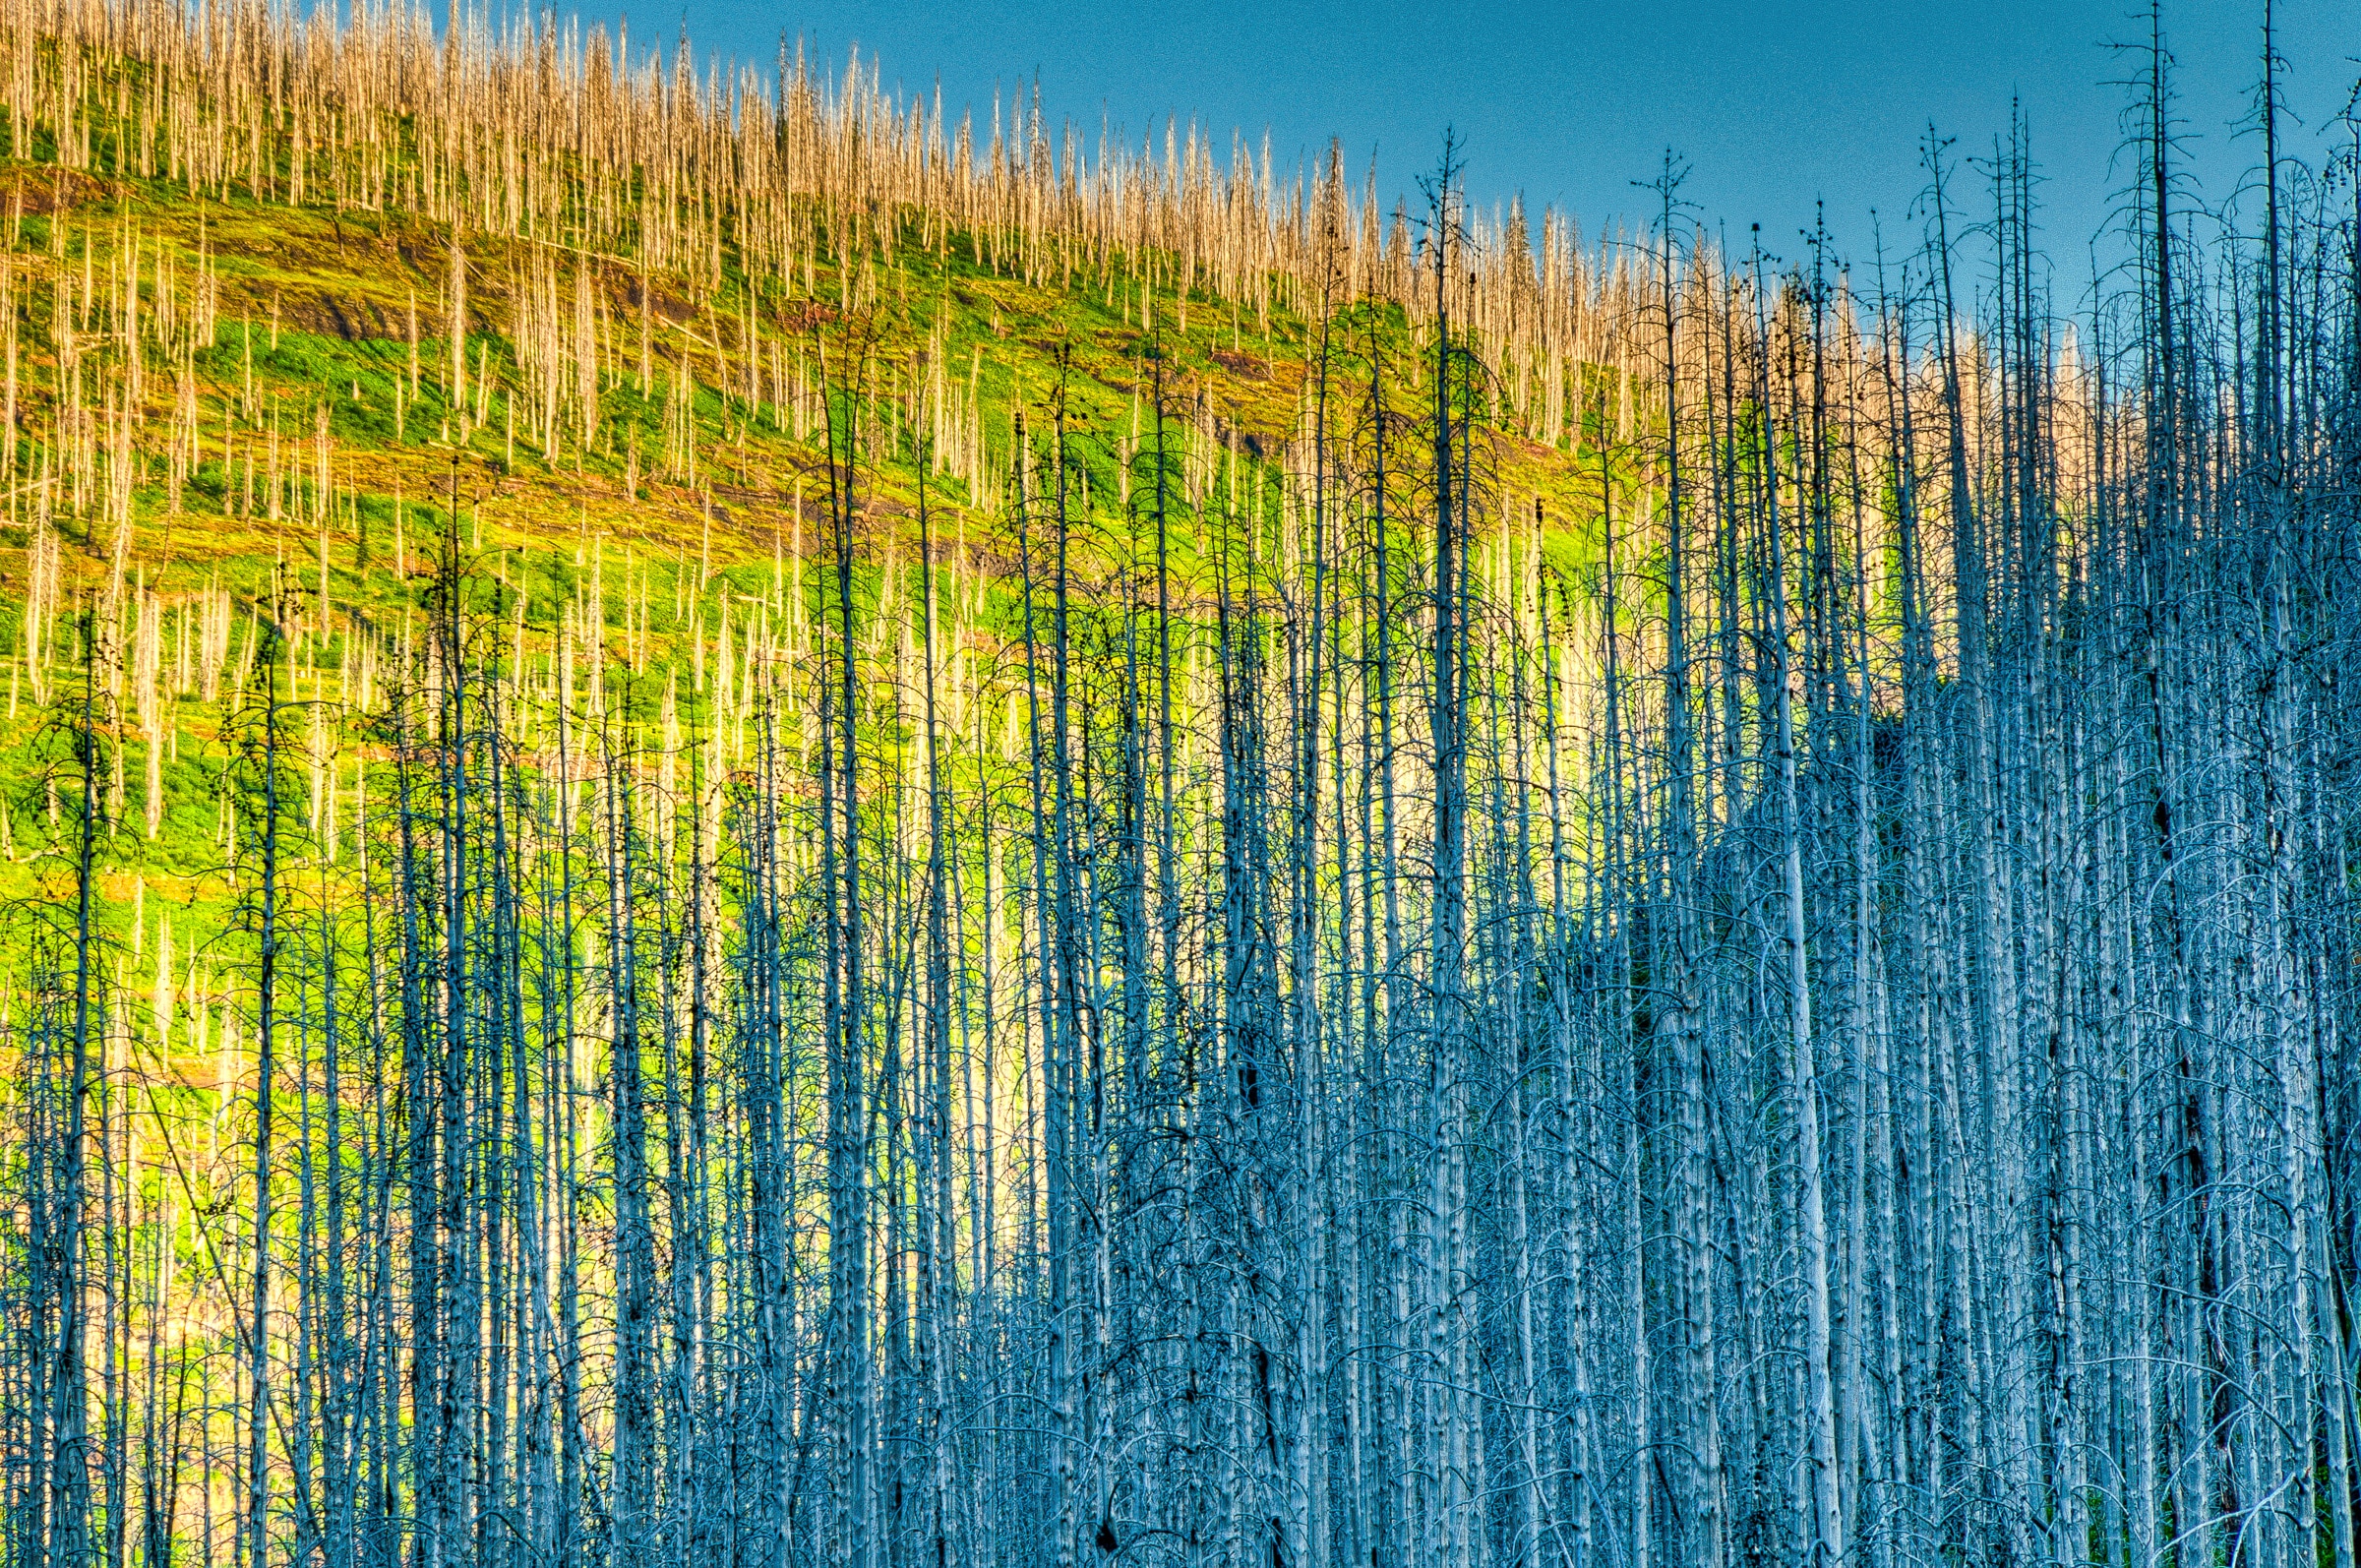 The remains of trees burned during the fires of 2003 in Glacier National Park, Montana.